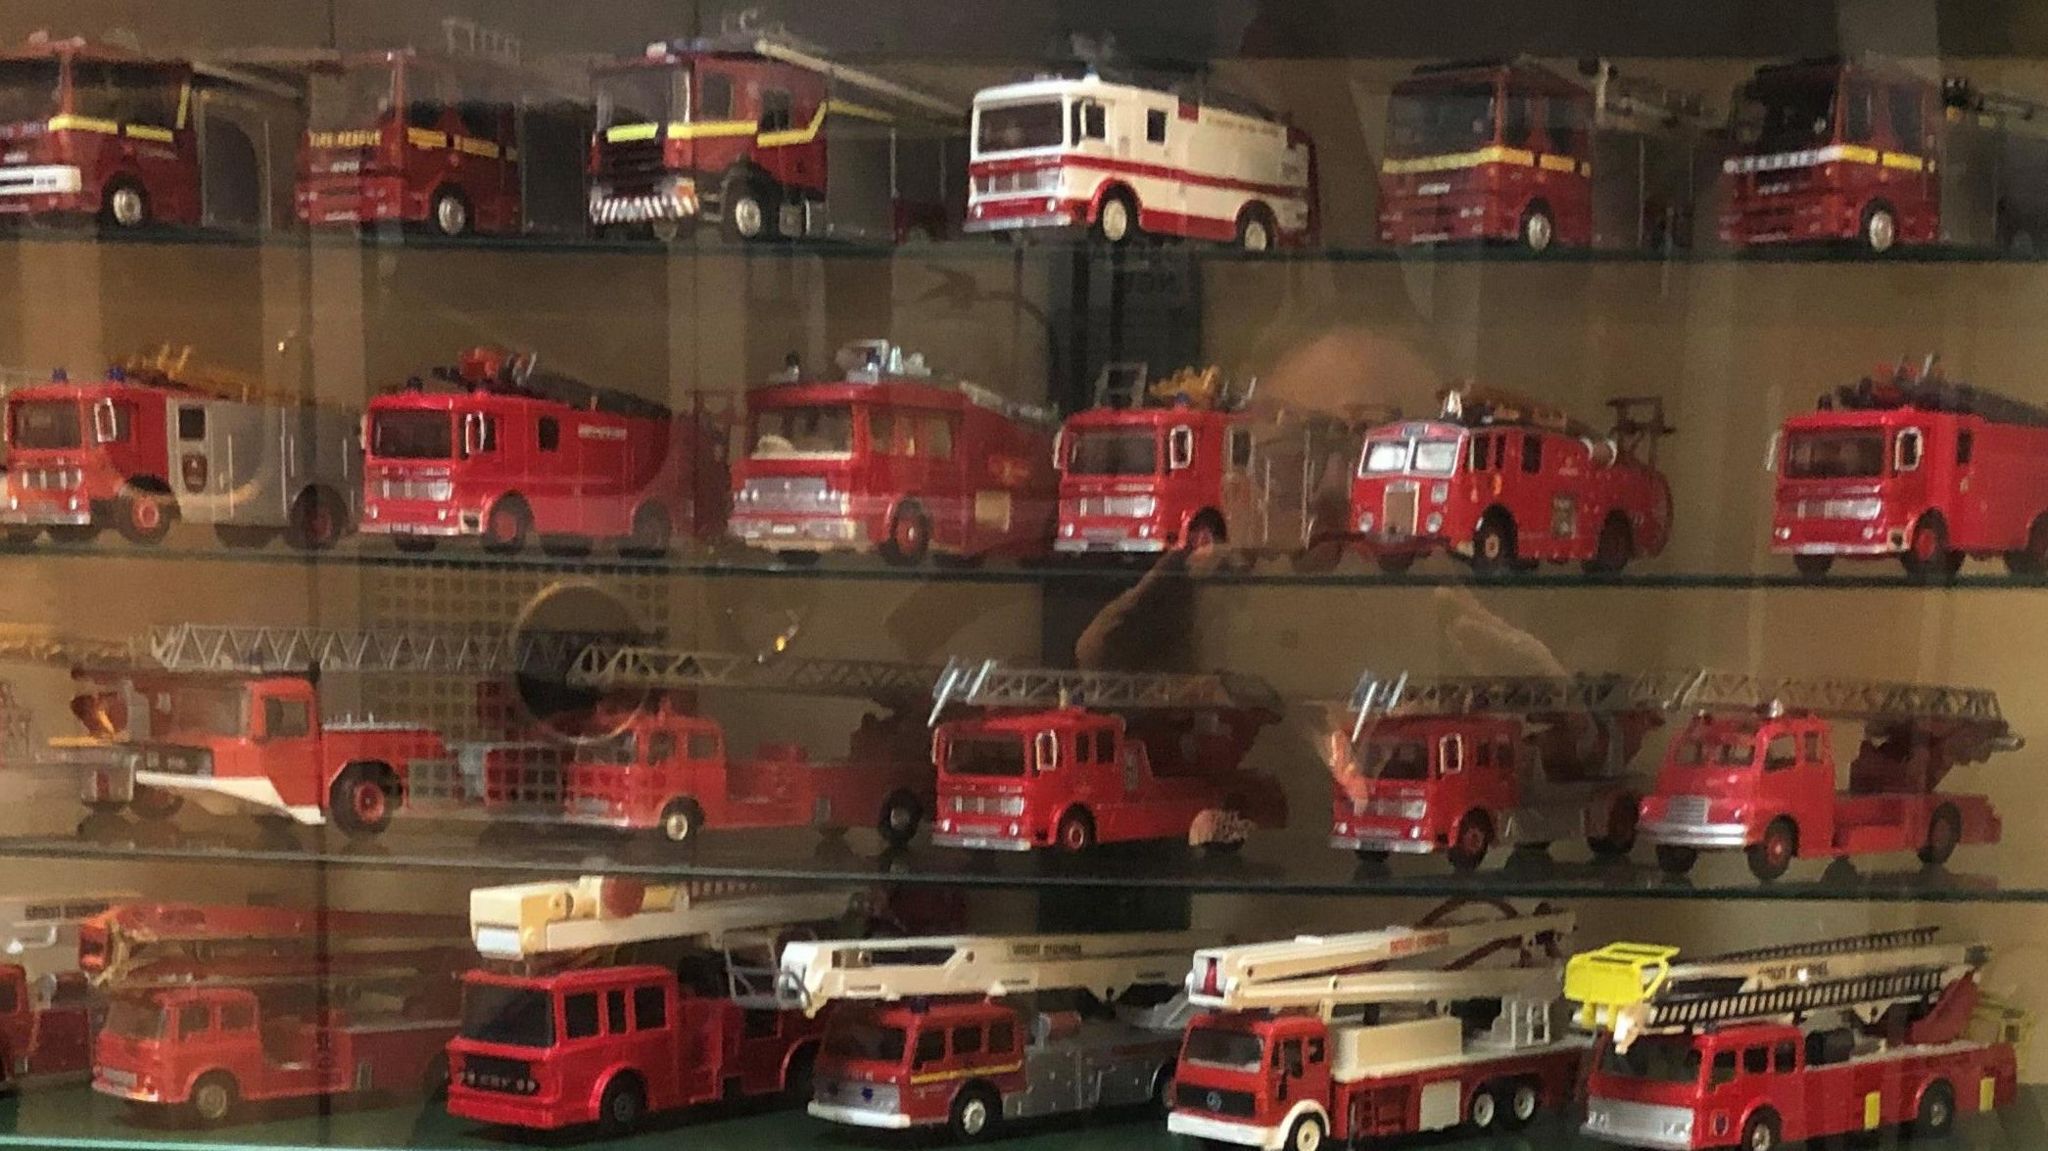 Toy fire engines in a glass cabinet